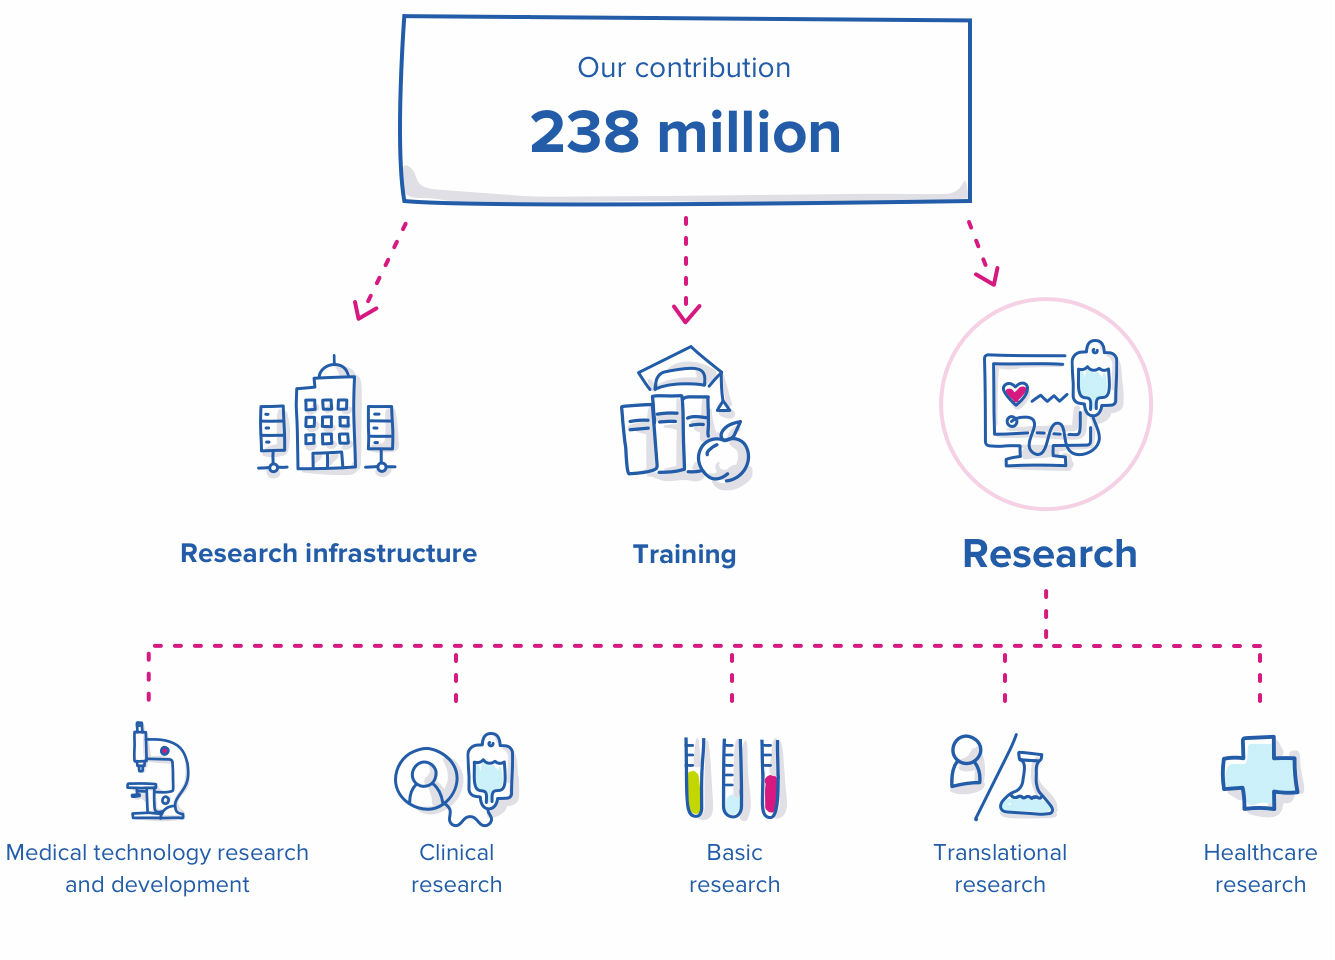 Our contribution to research and training during 2016 amounted to 238 million Swedish crowns, distributed to research infrastructure, training, and research. Within research, we support the disciplines of medical technology research and development, clinical research, basic research, translational research and healthcare research. 